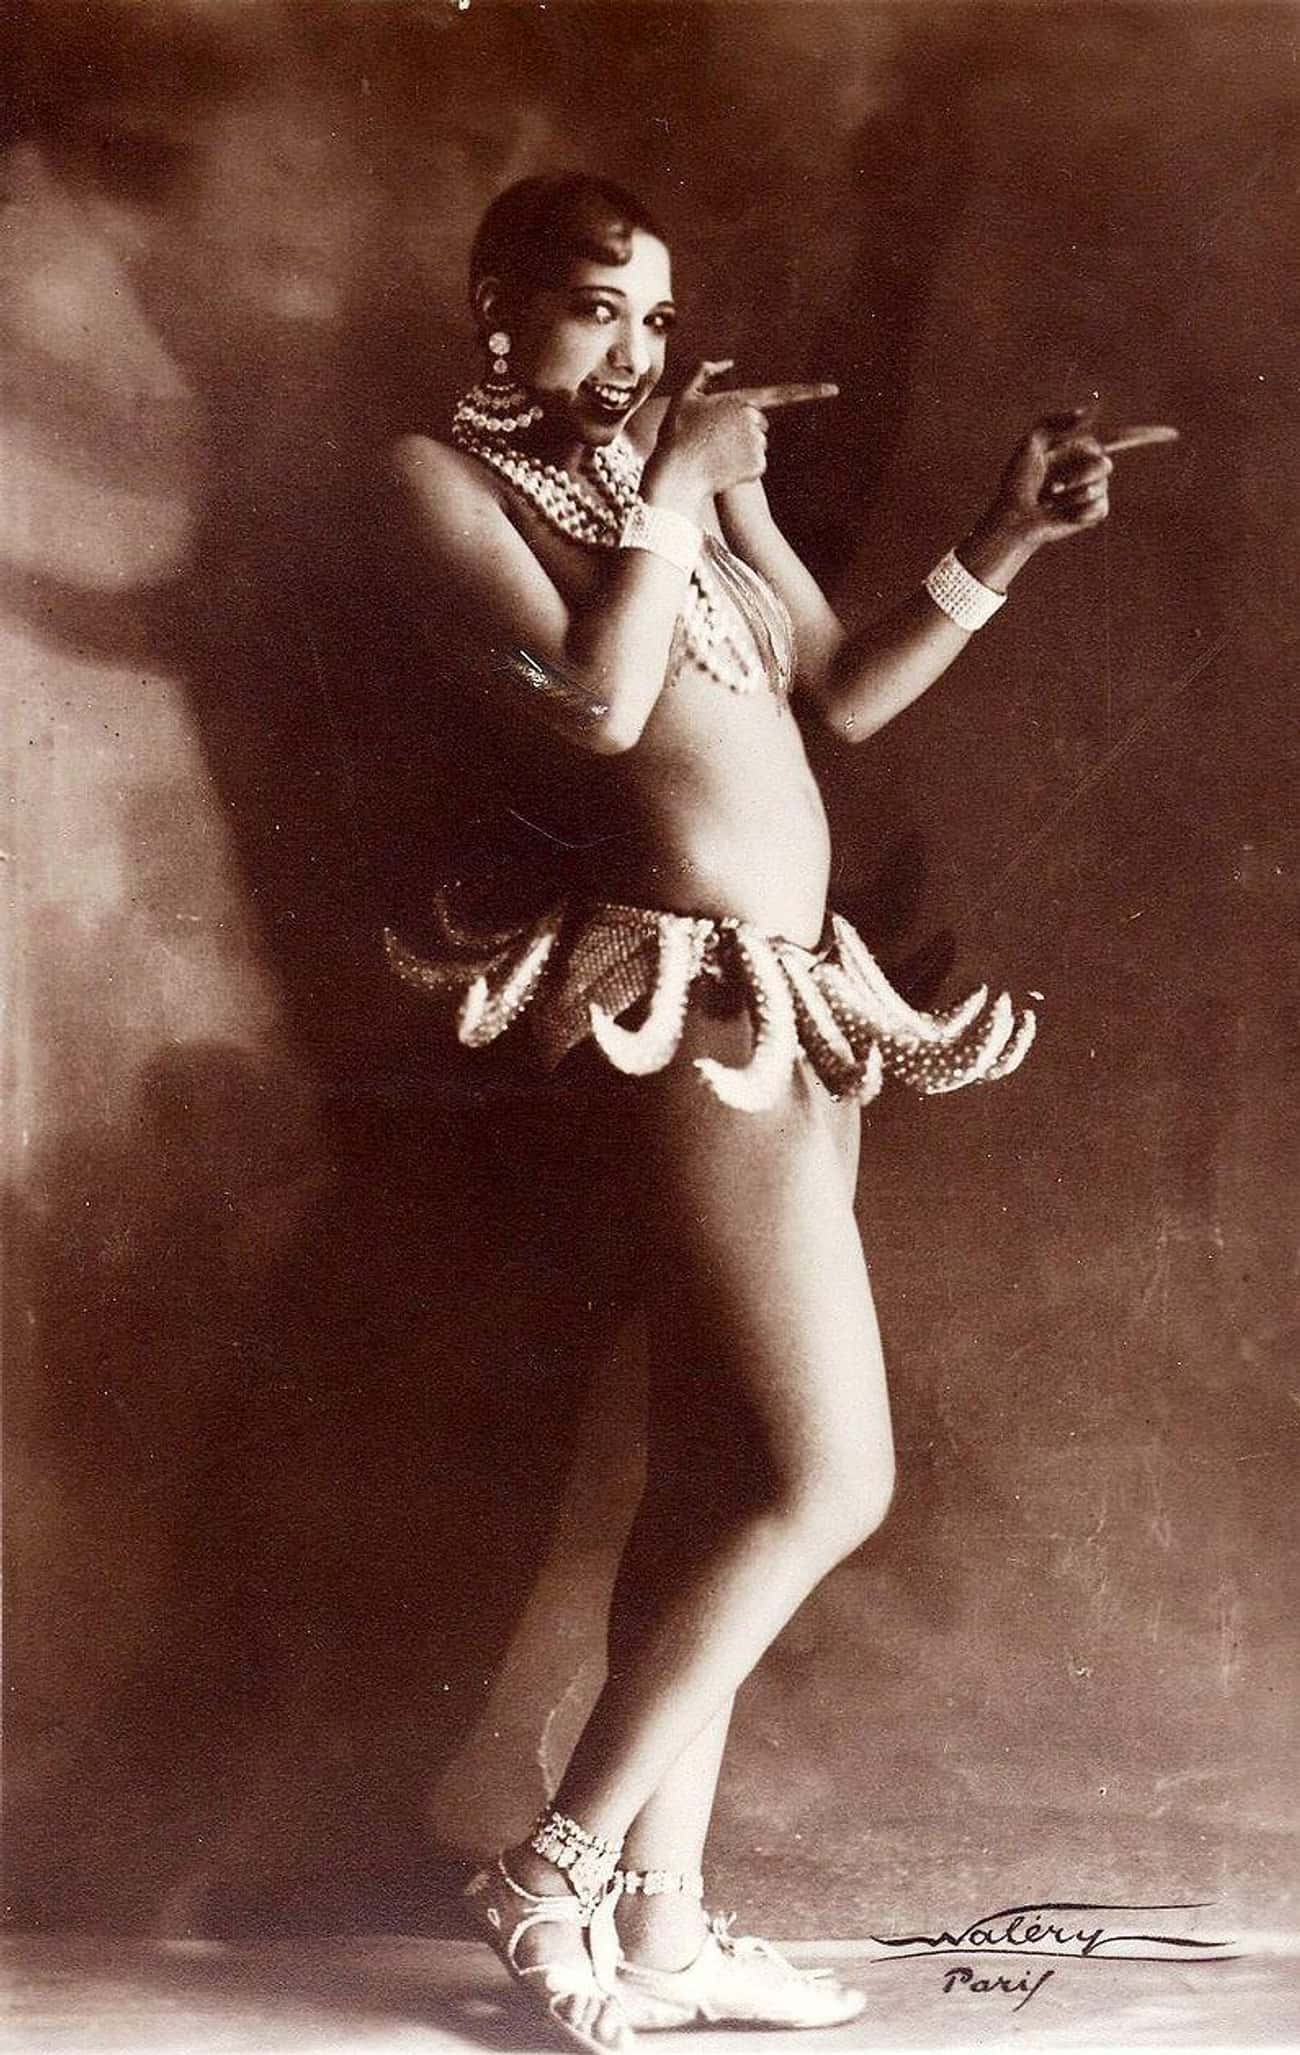 Baker Became Known As &#39;Black Venus&#39; For Her Revealing Dances And Fashion